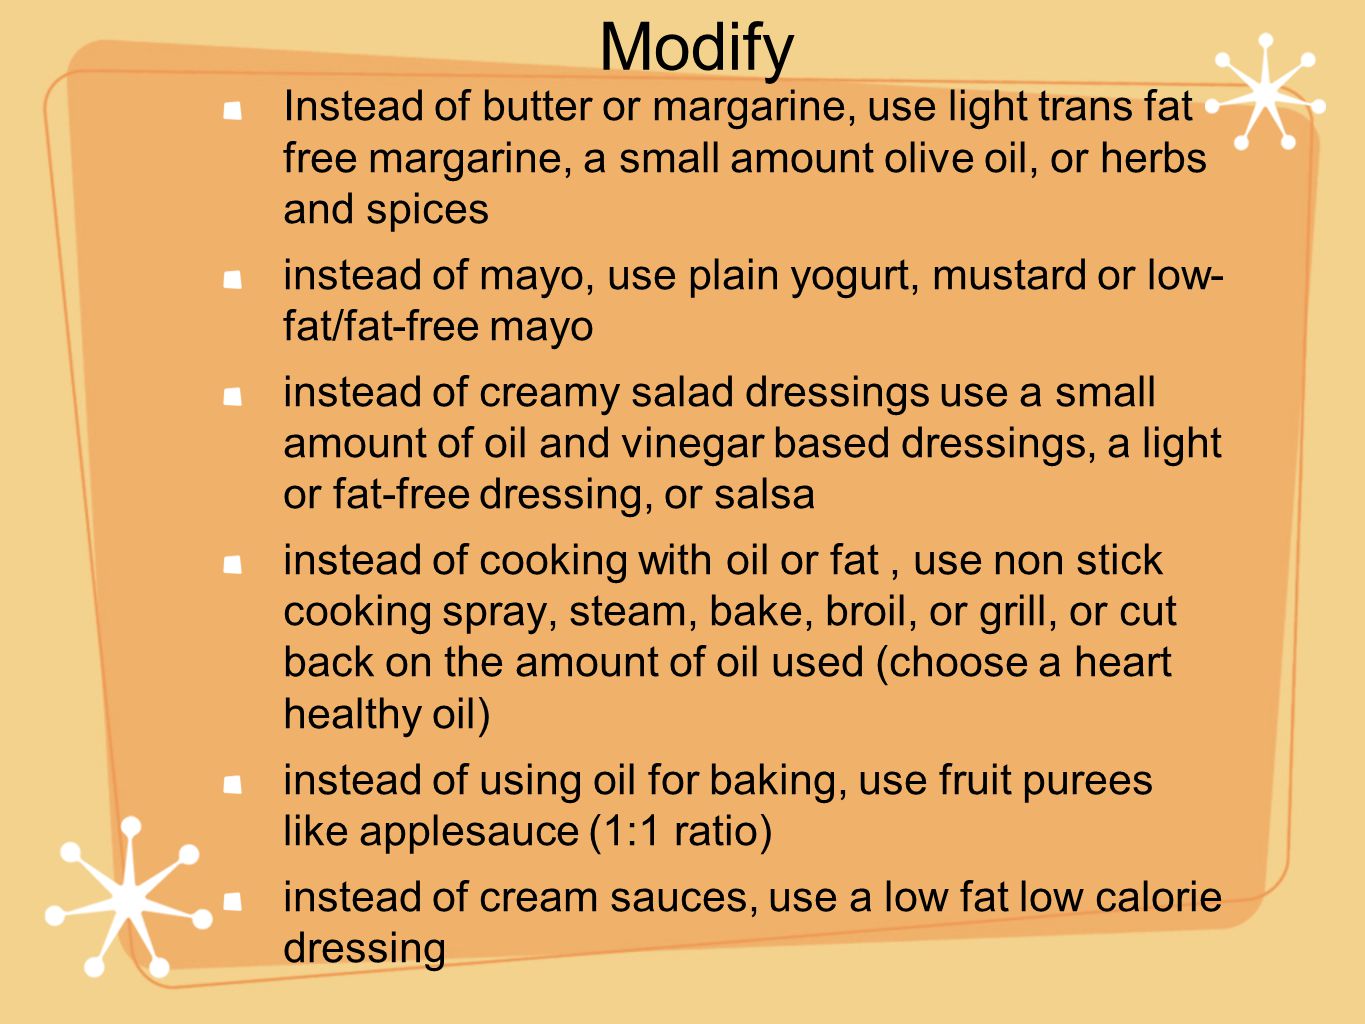 Instead of butter or margarine, use light trans fat free margarine, a small amount olive oil, or herbs and spices instead of mayo, use plain yogurt, mustard or low- fat/fat-free mayo instead of creamy salad dressings use a small amount of oil and vinegar based dressings, a light or fat-free dressing, or salsa instead of cooking with oil or fat, use non stick cooking spray, steam, bake, broil, or grill, or cut back on the amount of oil used (choose a heart healthy oil) instead of using oil for baking, use fruit purees like applesauce (1:1 ratio) instead of cream sauces, use a low fat low calorie dressing Modify